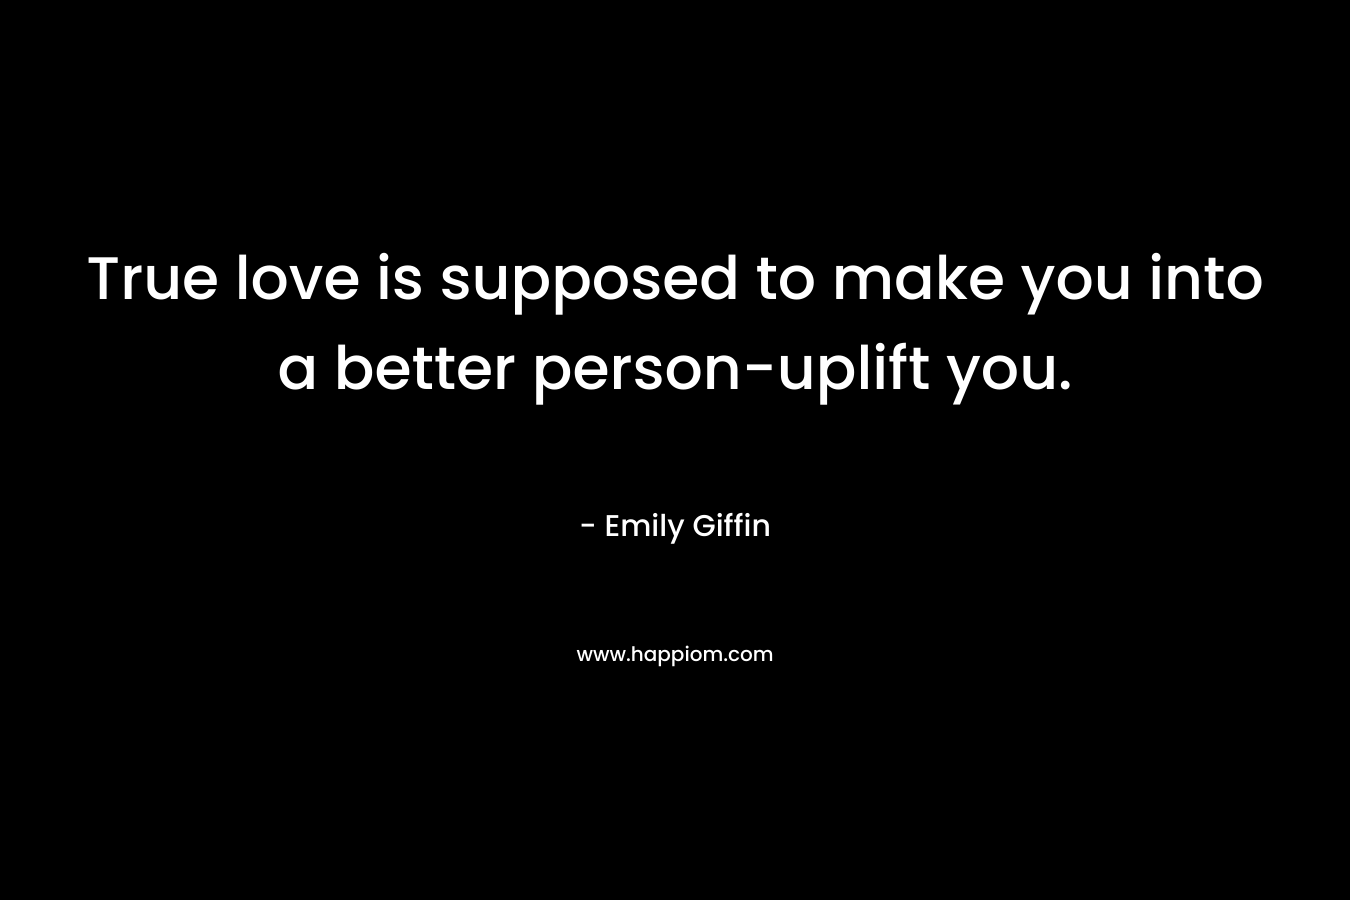 True love is supposed to make you into a better person-uplift you.